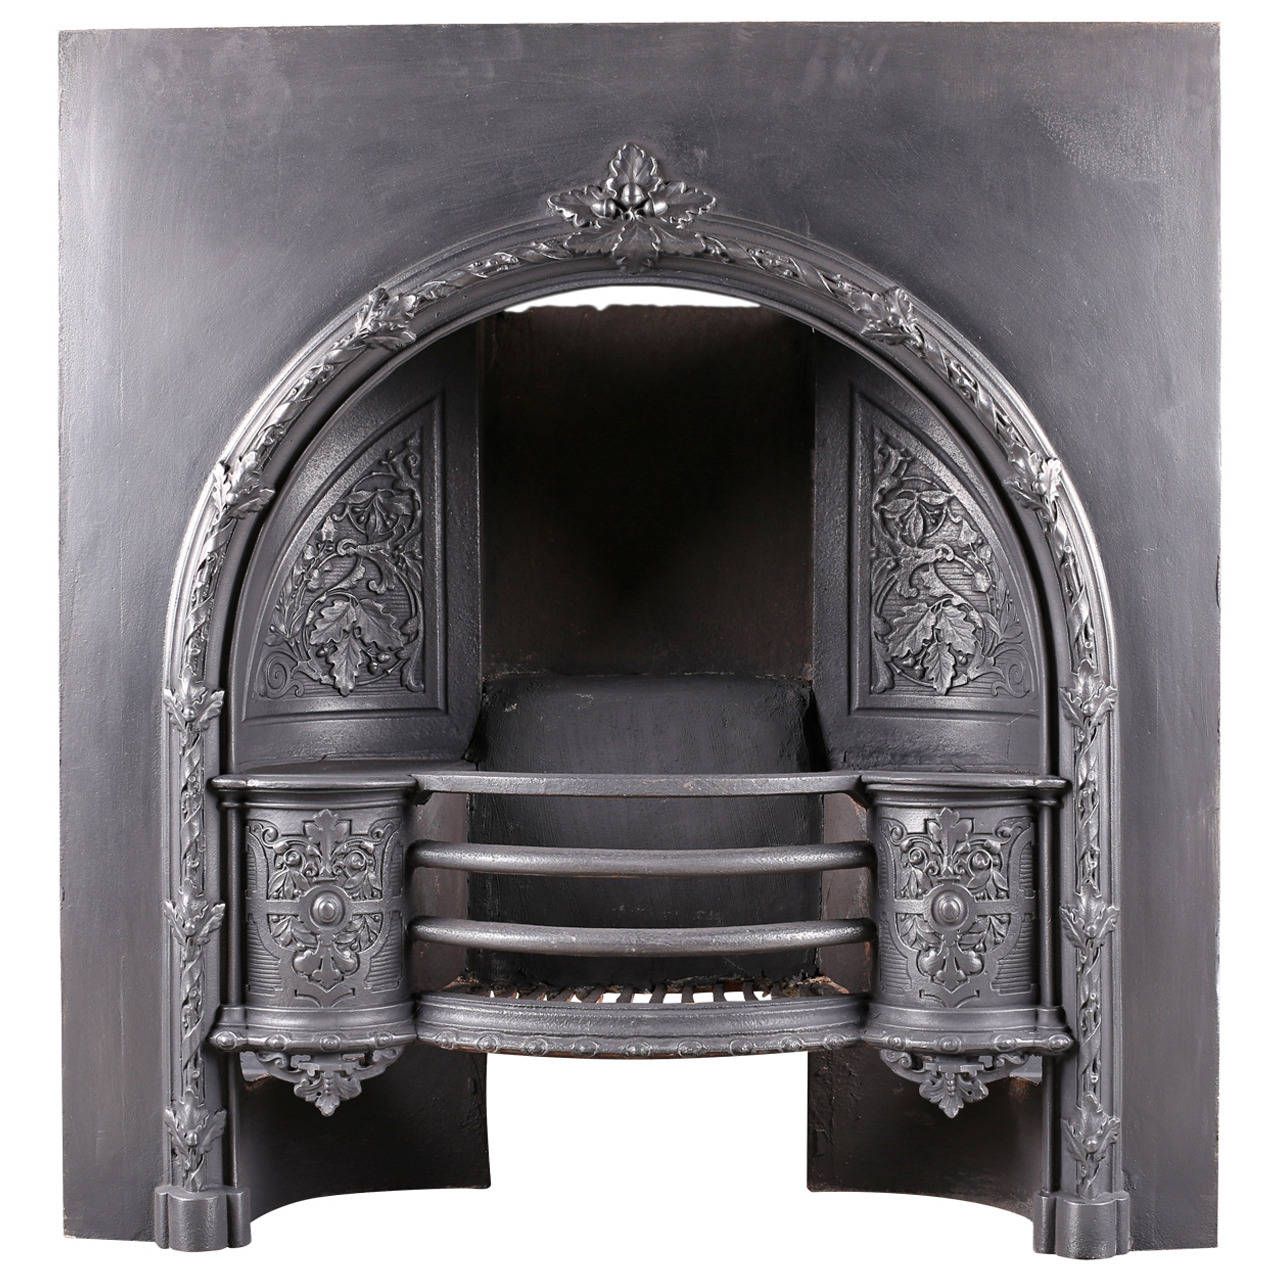 Arched Fireplace Unique Antique Early Victorian Cast Iron Fireplace Grate